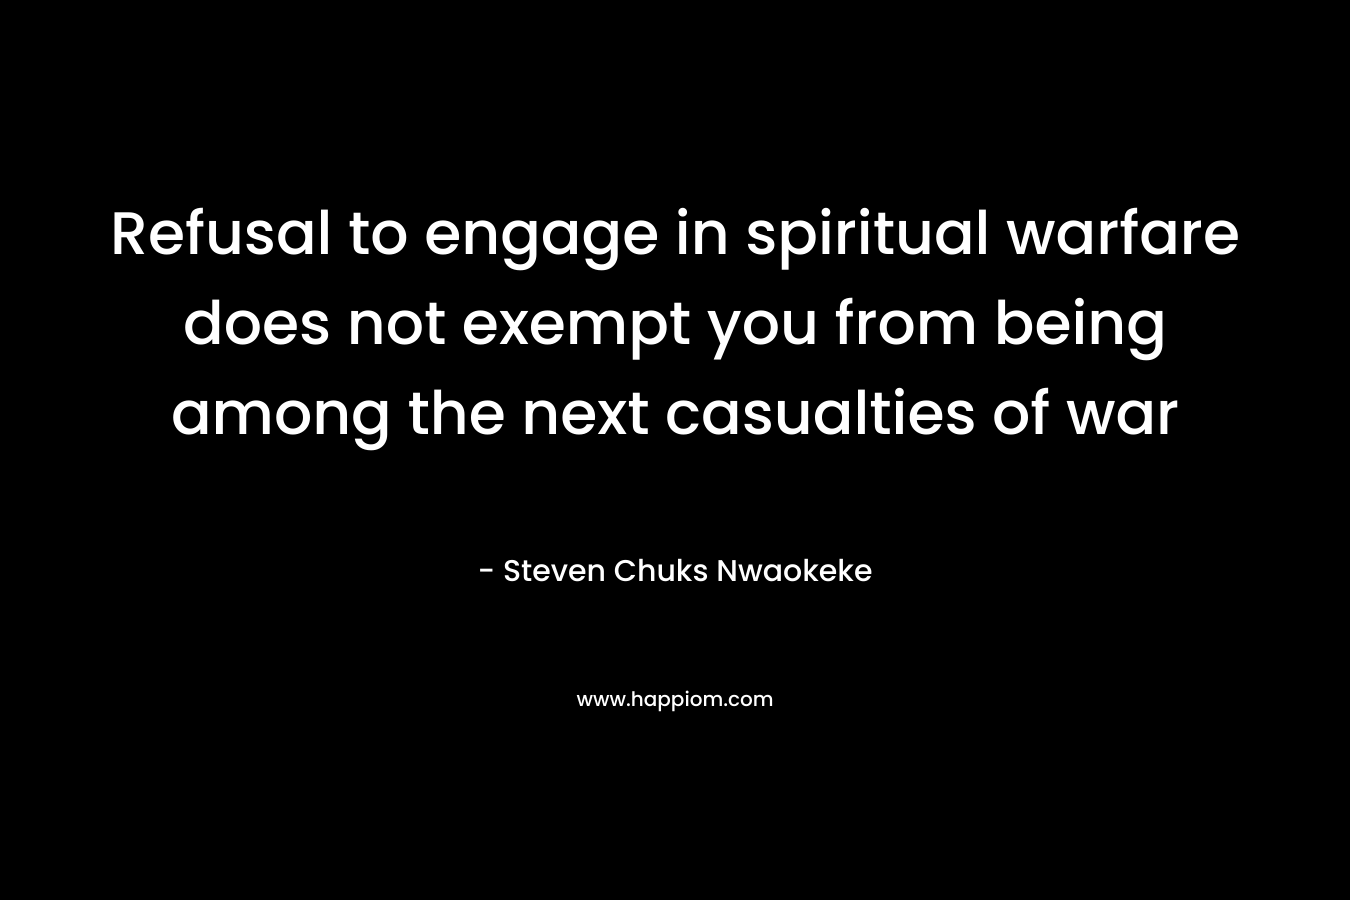 Refusal to engage in spiritual warfare does not exempt you from being among the next casualties of war – Steven Chuks Nwaokeke